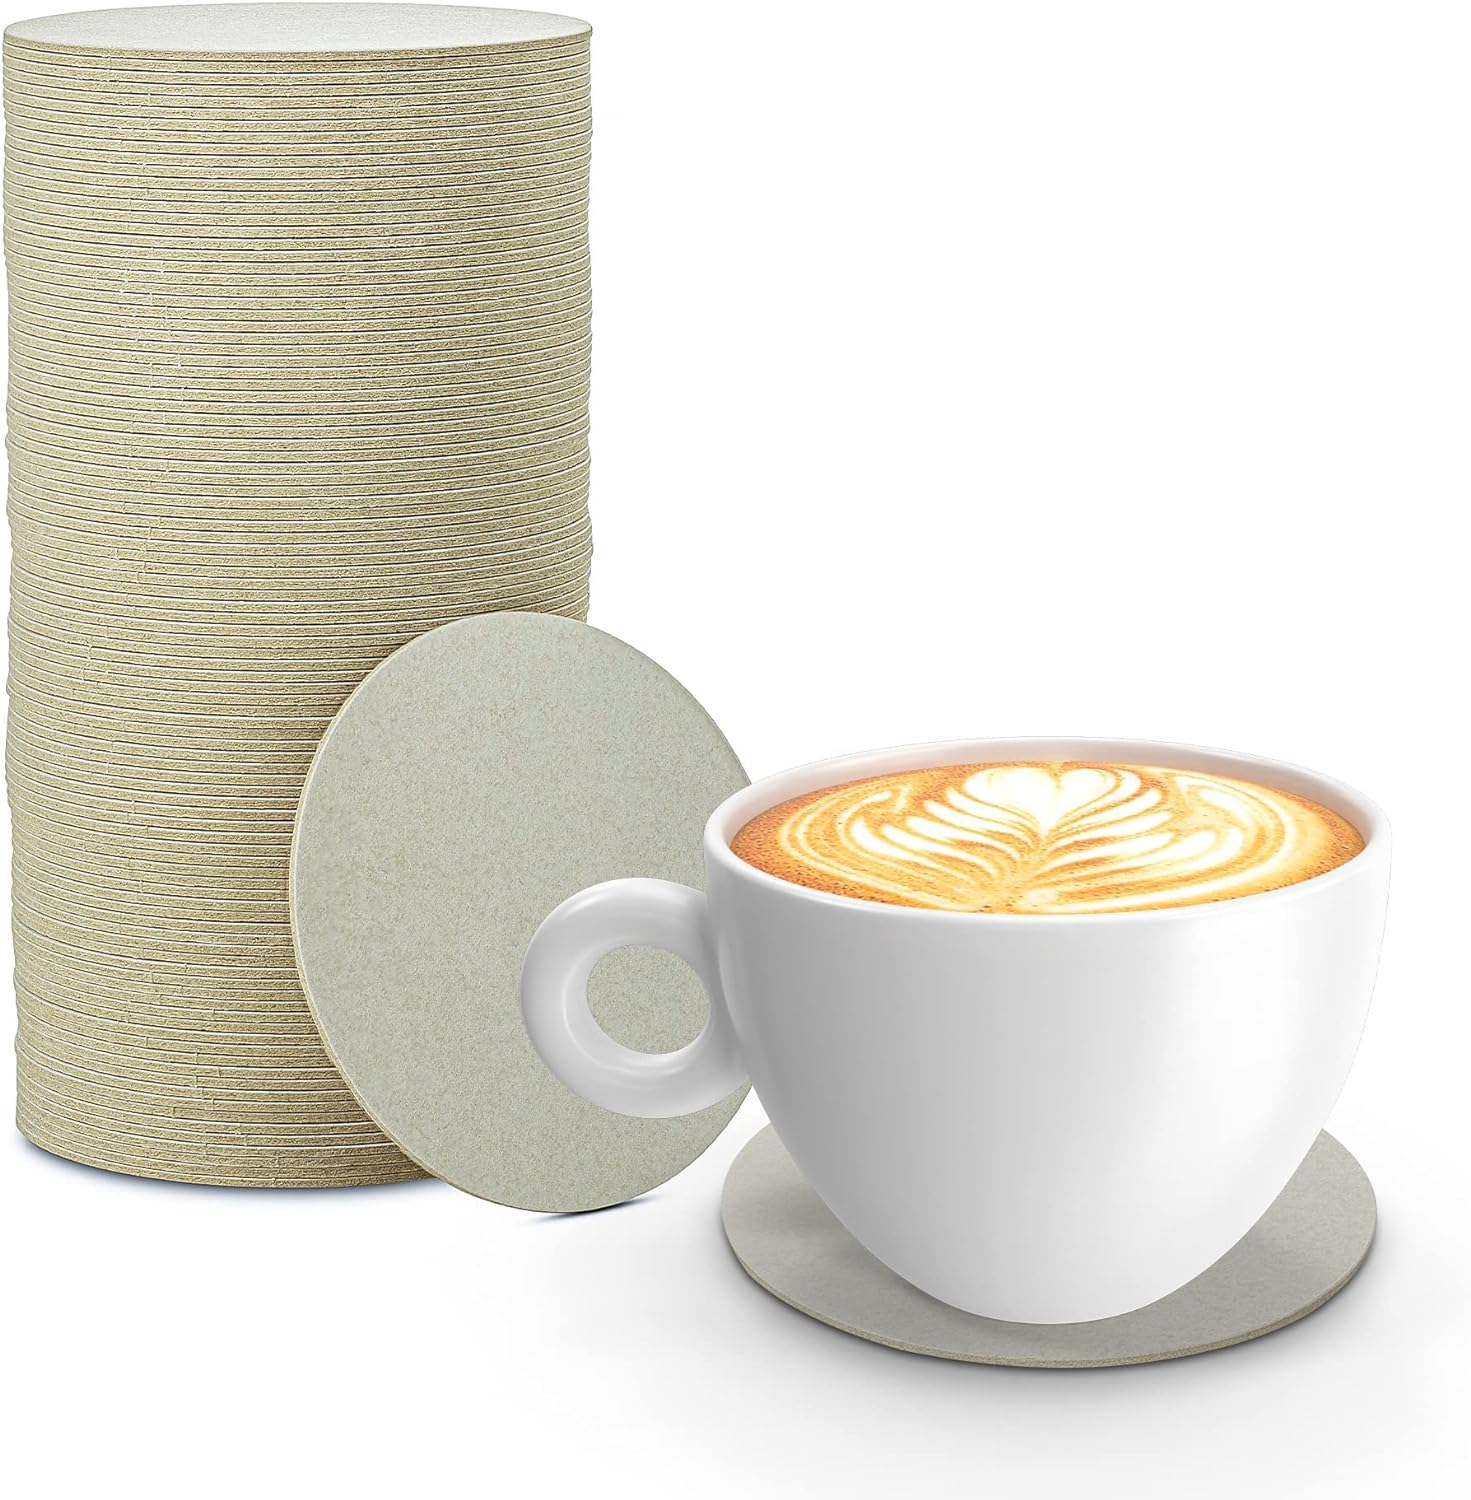 MT Products 4" White Round Cup Coasters / Beverage Coasters - Pack of 125